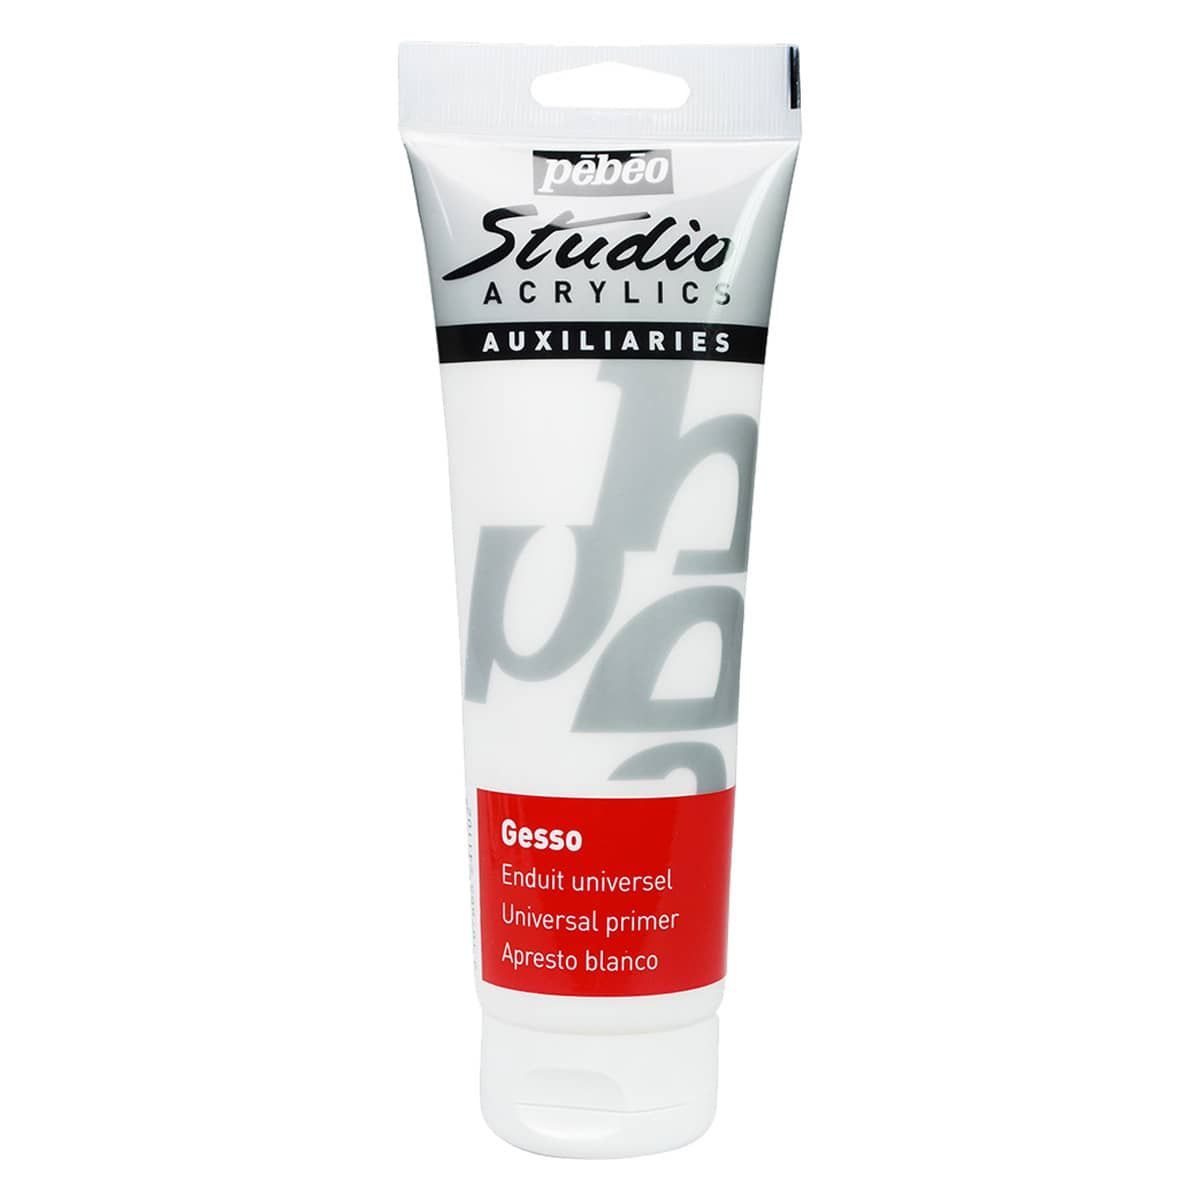 Pebeo Studio Acrylics Gesso Painting Primer 250ml in Black or White 